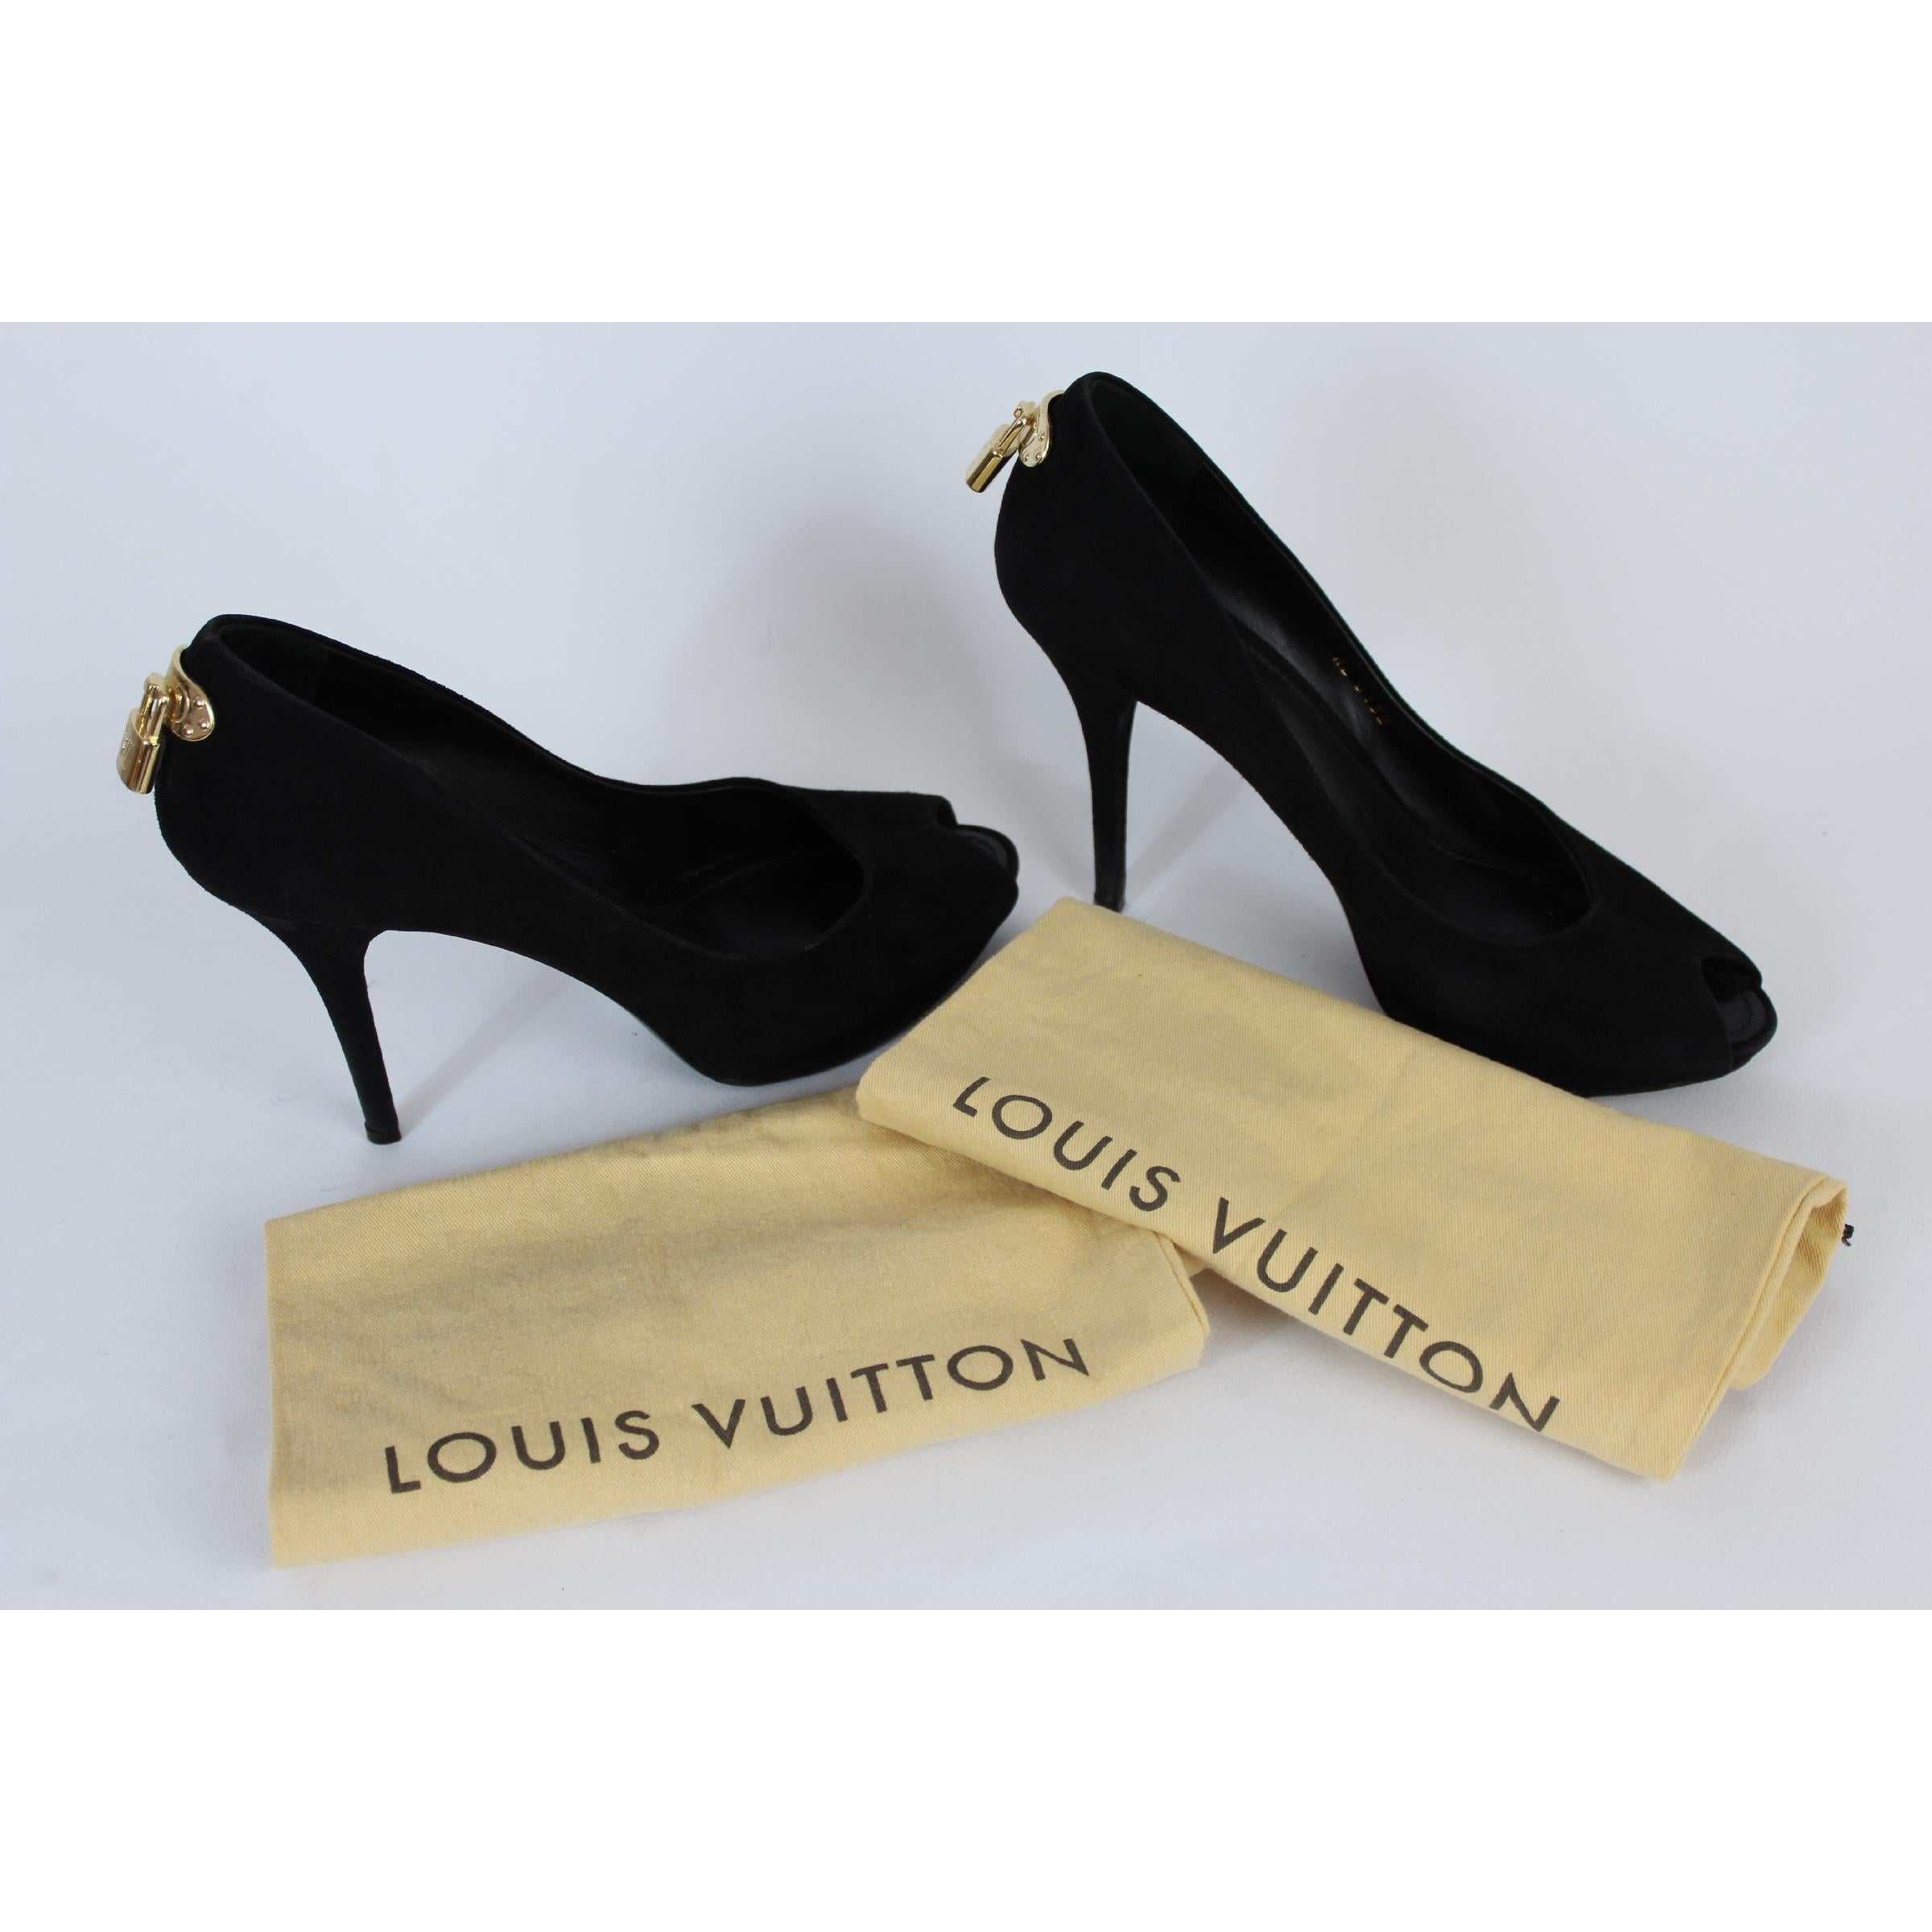 Louis Vuitton heeled shoes in black suede, model OH REALLY. Launched in 2010 this shoe has quickly become an icon of the French company, and an obsession of shoes-addicted. The hallmark of this peep-toe décolletée, that is to say shoes with the